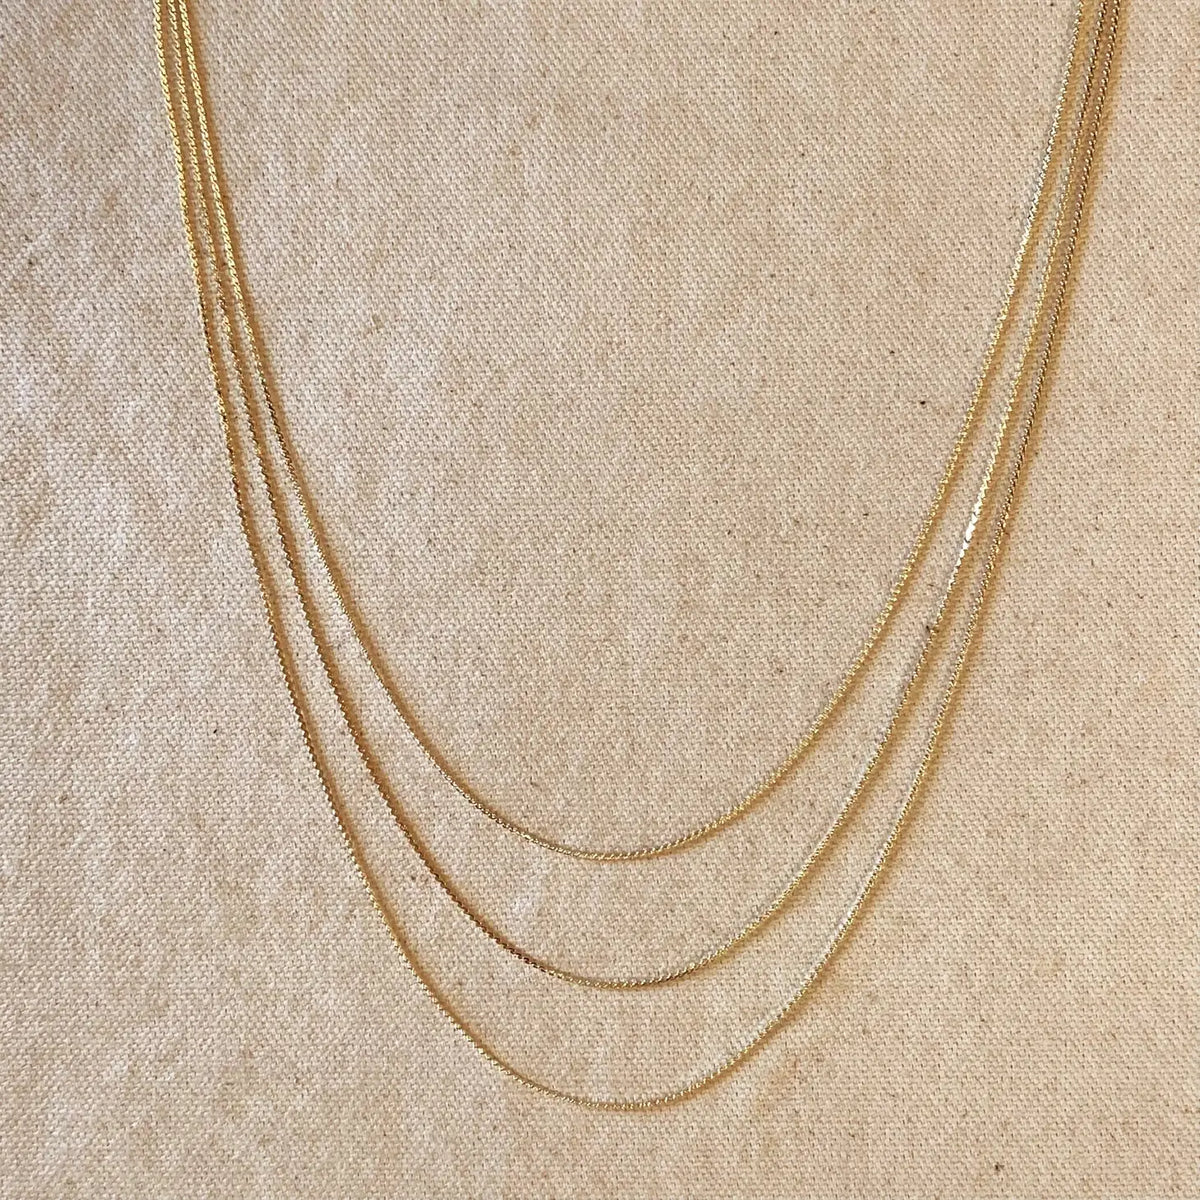 18k Gold Filled Dainty Chain Necklaces (18 and 20 inch)